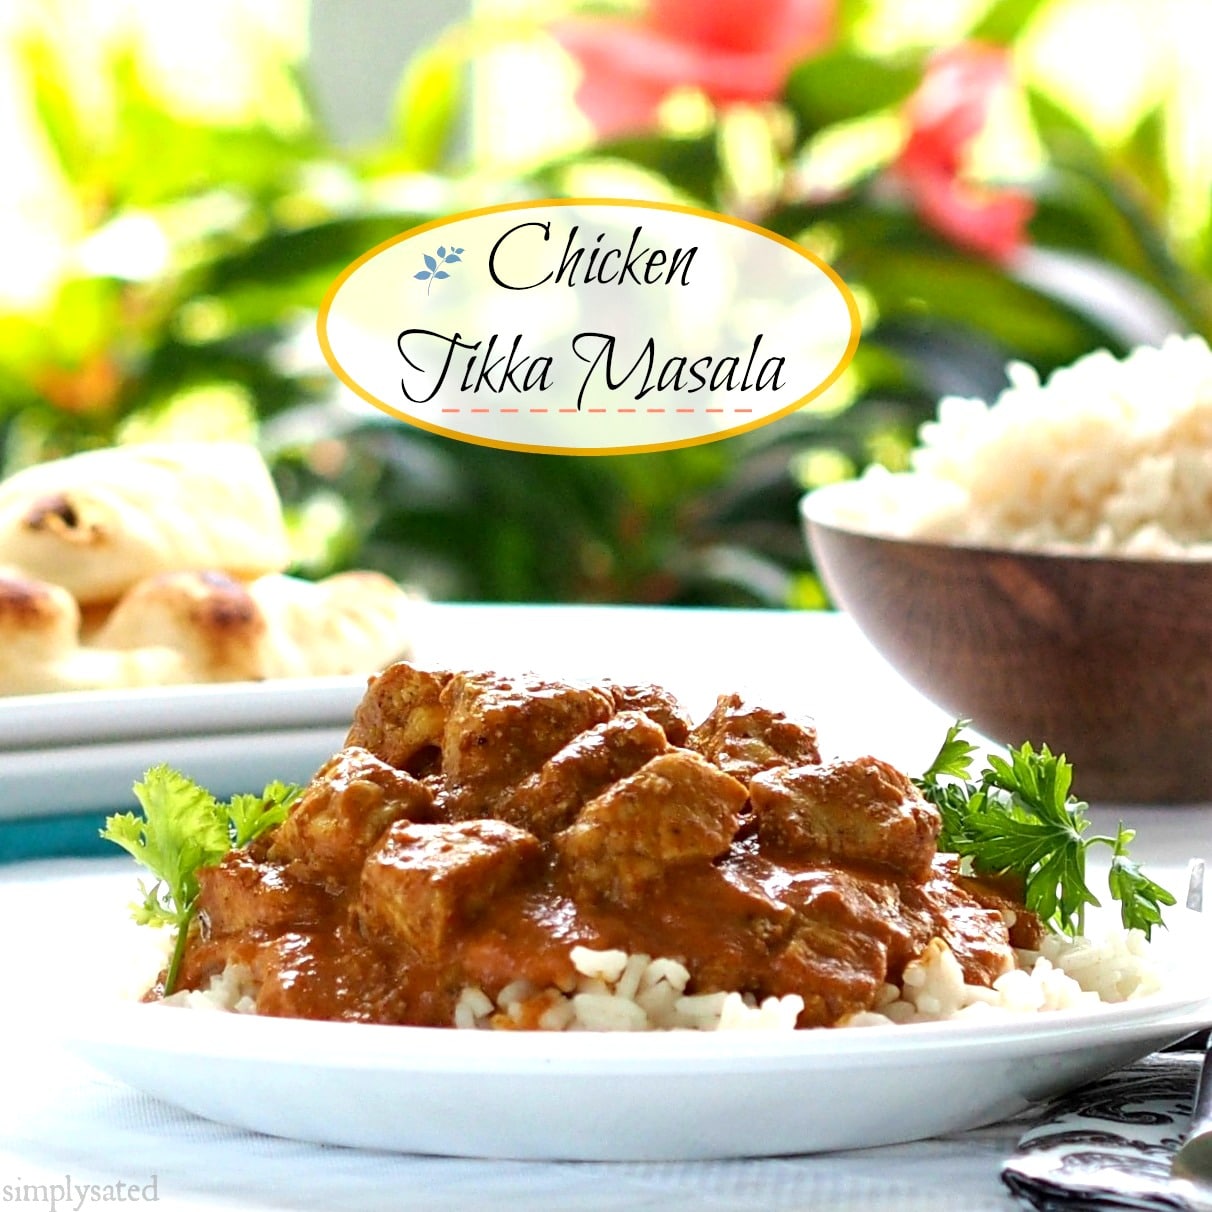 Chicken Tikka Masala - a delicious blend of tender chicken and Indian spices - easy & scrumptious. www.simplysated.com